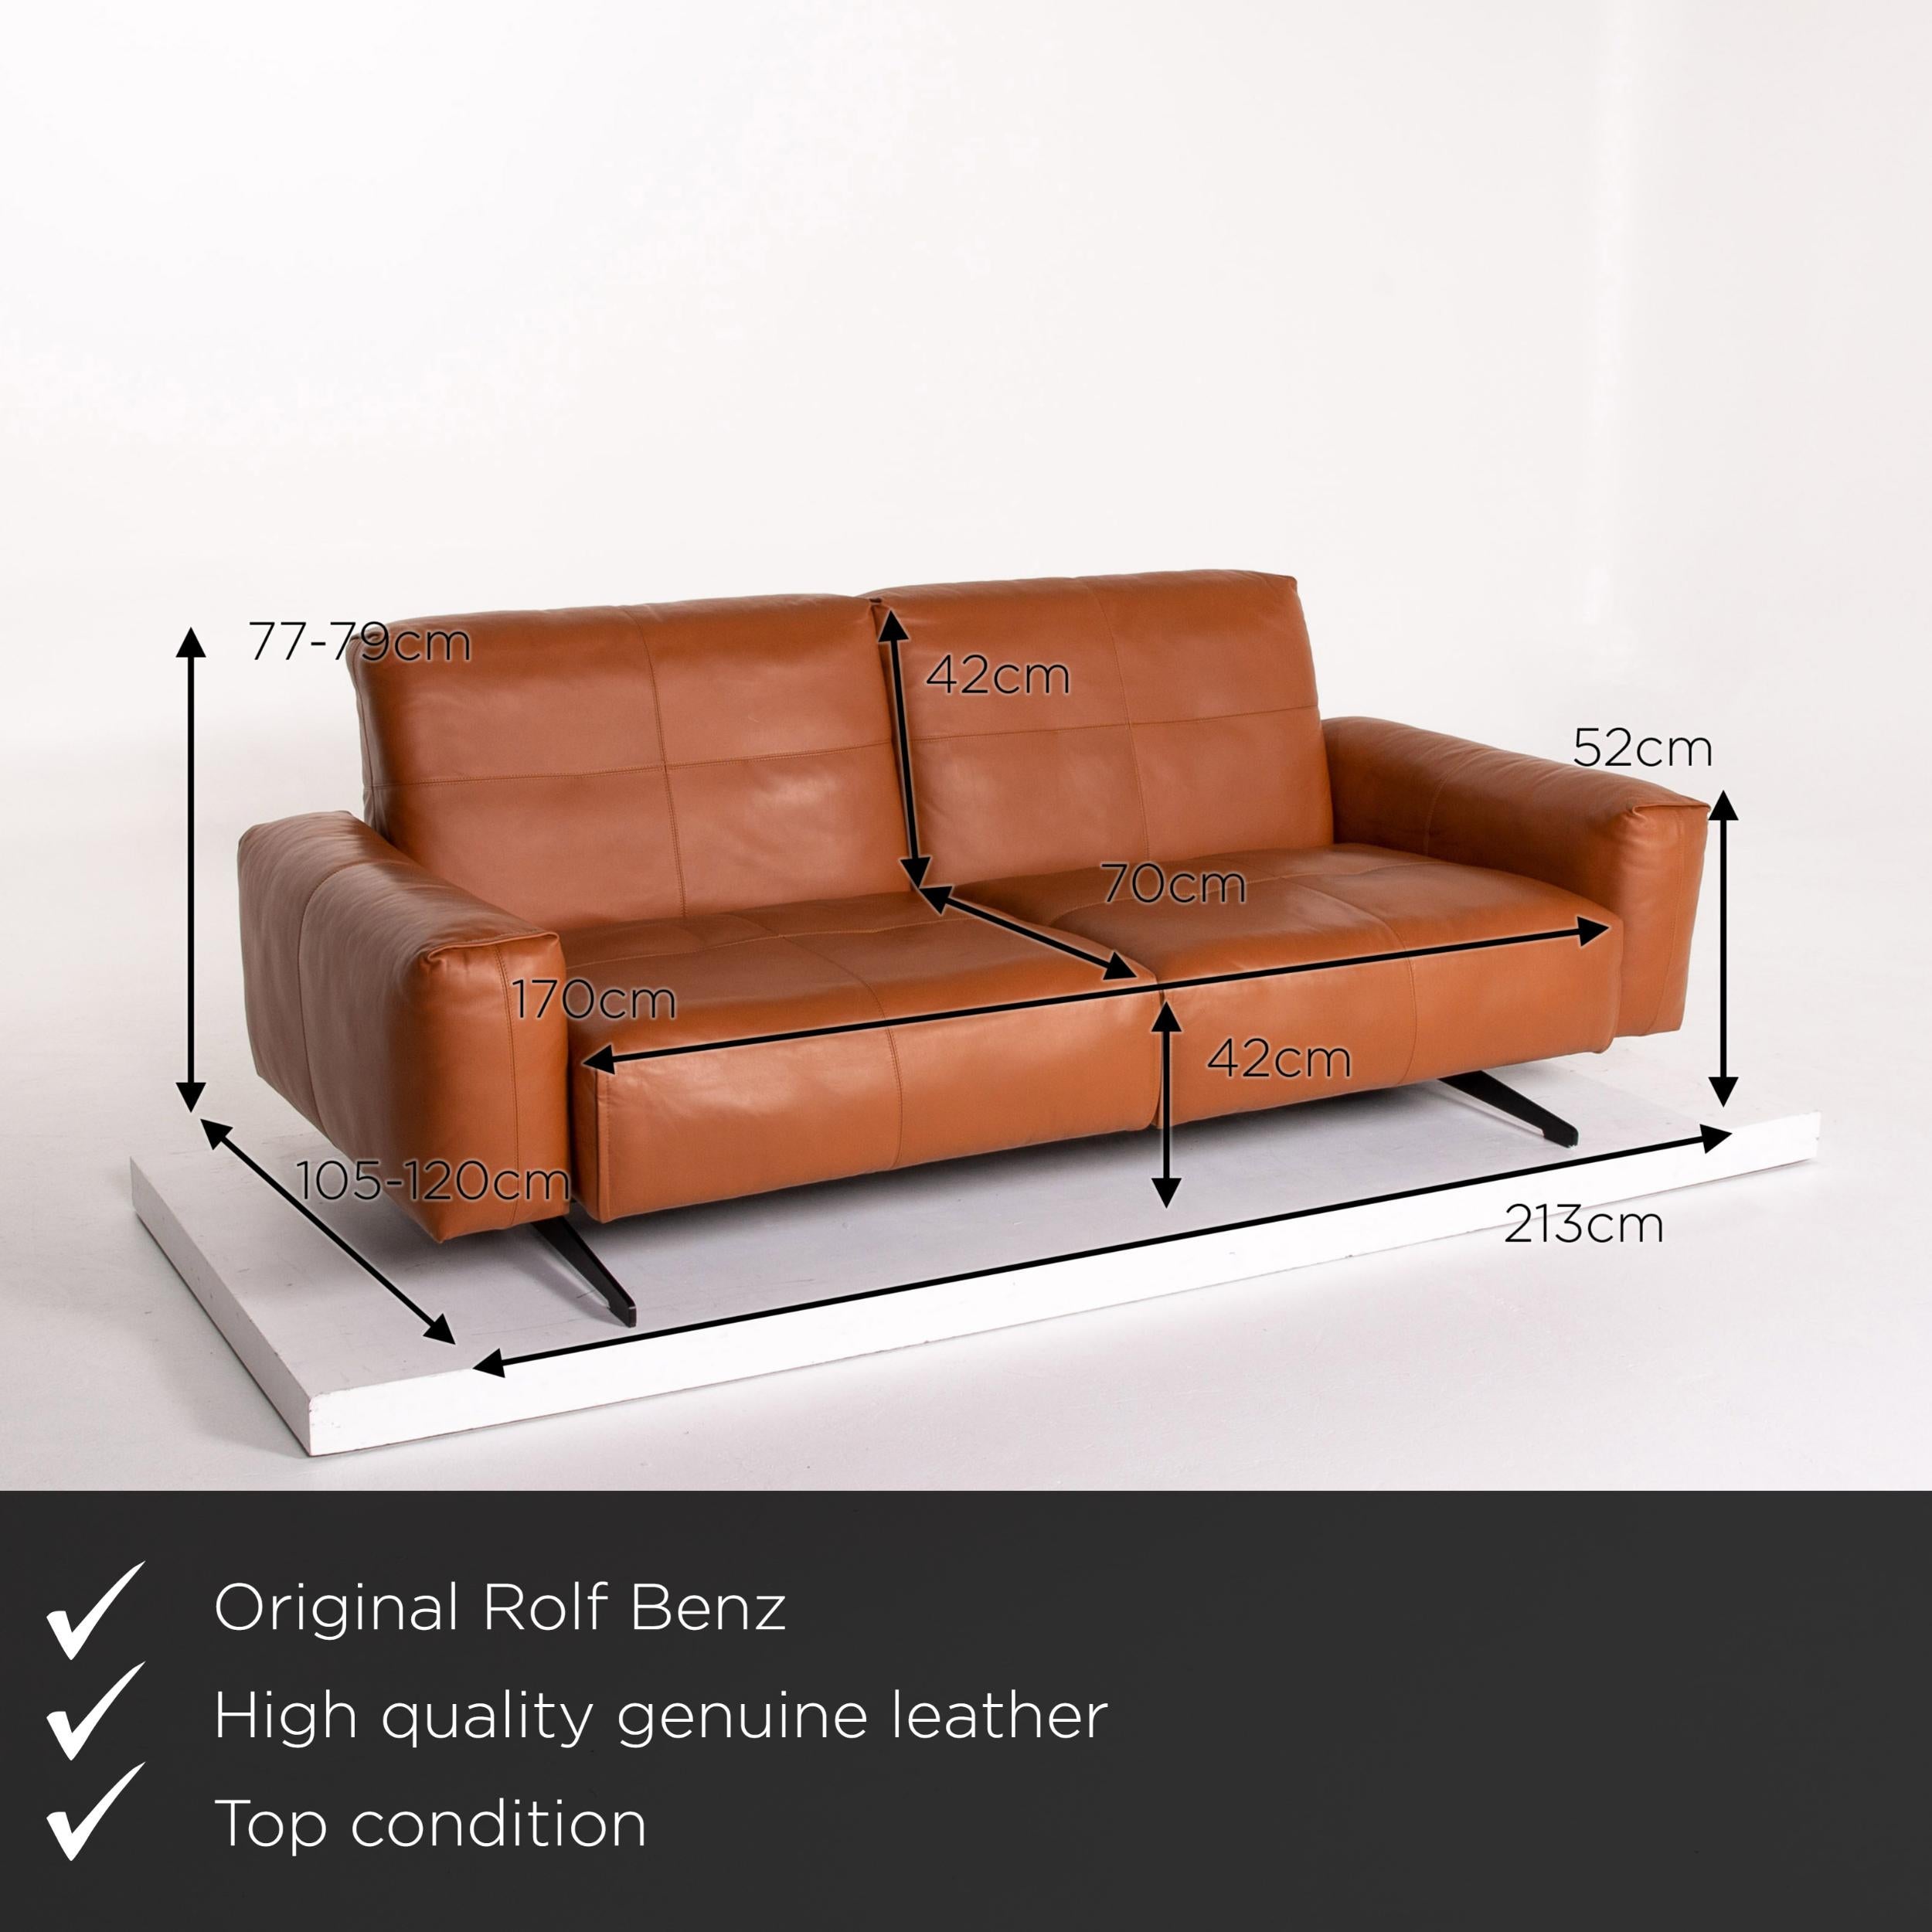 We present to you a Rolf Benz 50 leather sofa cognac brown three-seat function couch.


 Product measurements in centimeters:
 

Depth 105
Width 213
Height 79
Seat height 42
Rest height 52
Seat depth 70
Seat width 170
Back height 42.
 